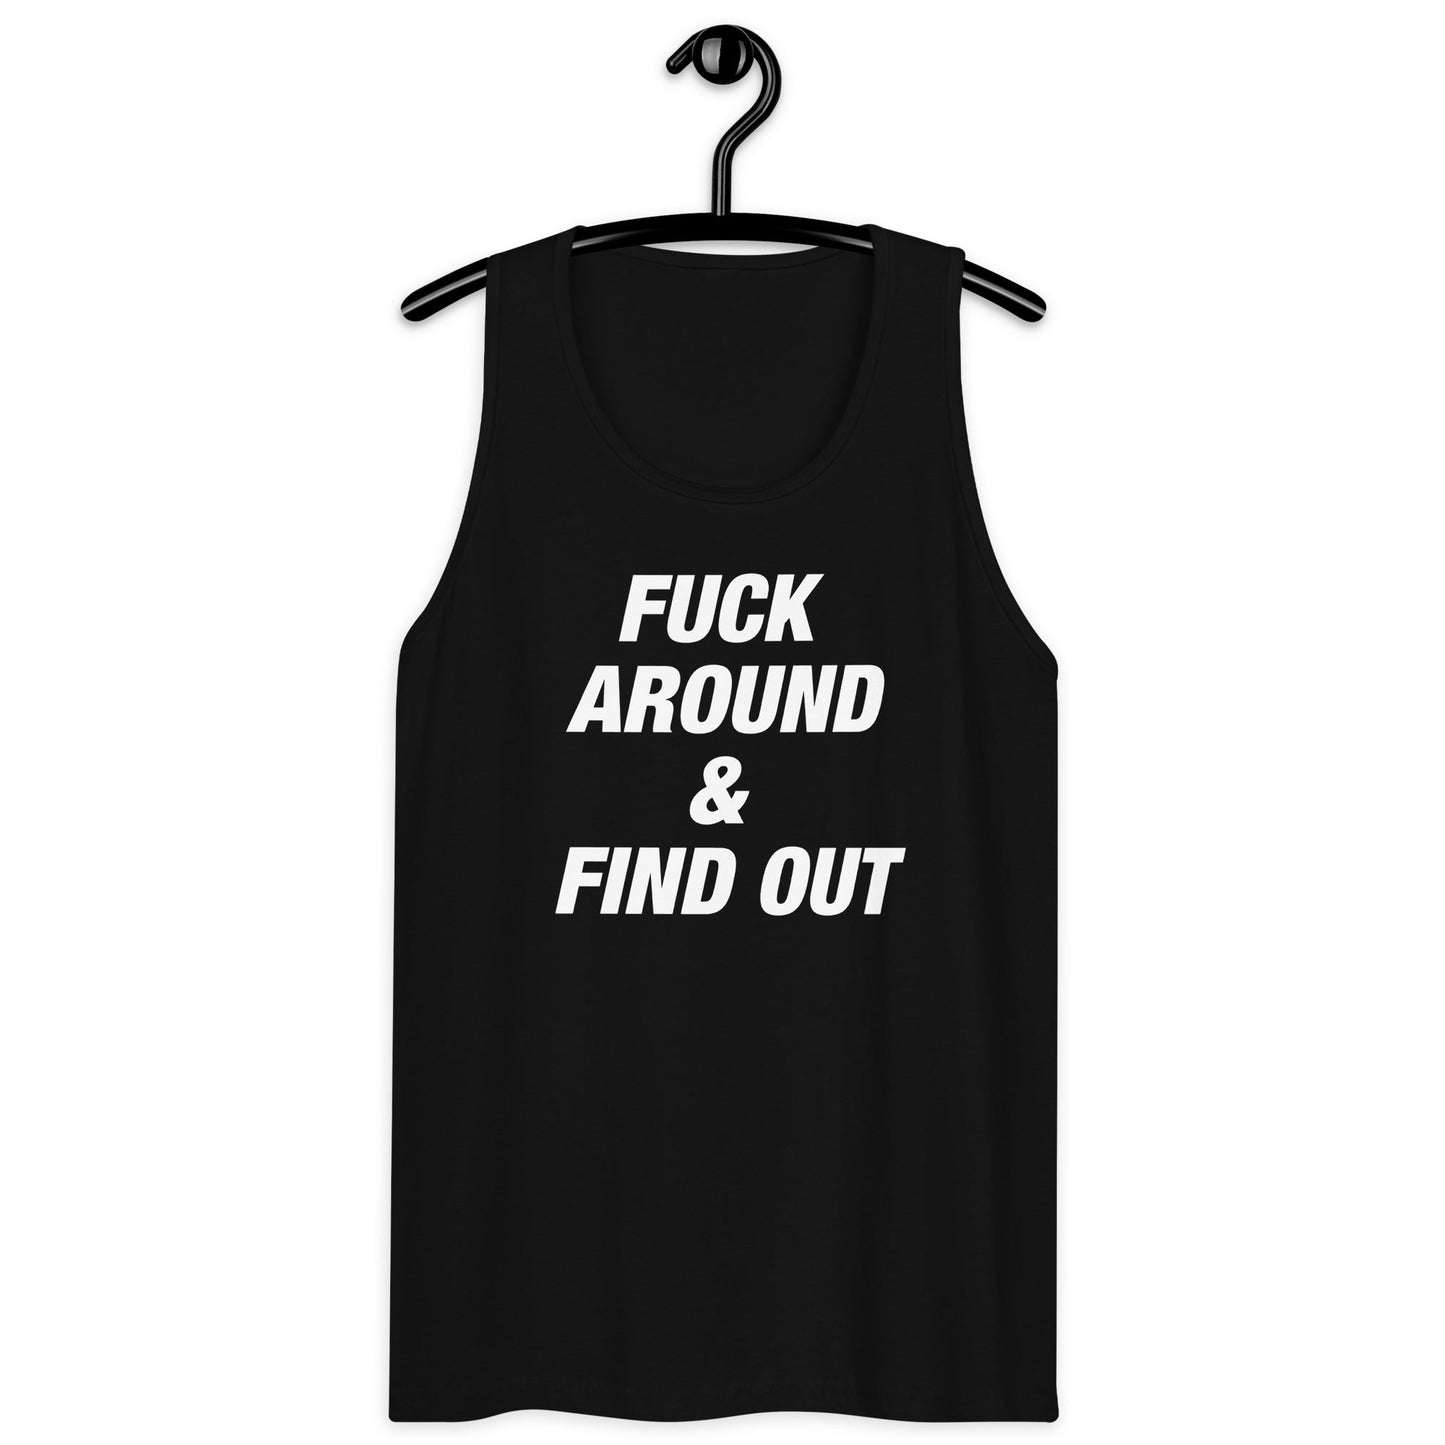 Farris Wheel "Fuck Around and Find Out" Men’s Premium Tank Top - BeExtra! Apparel & More